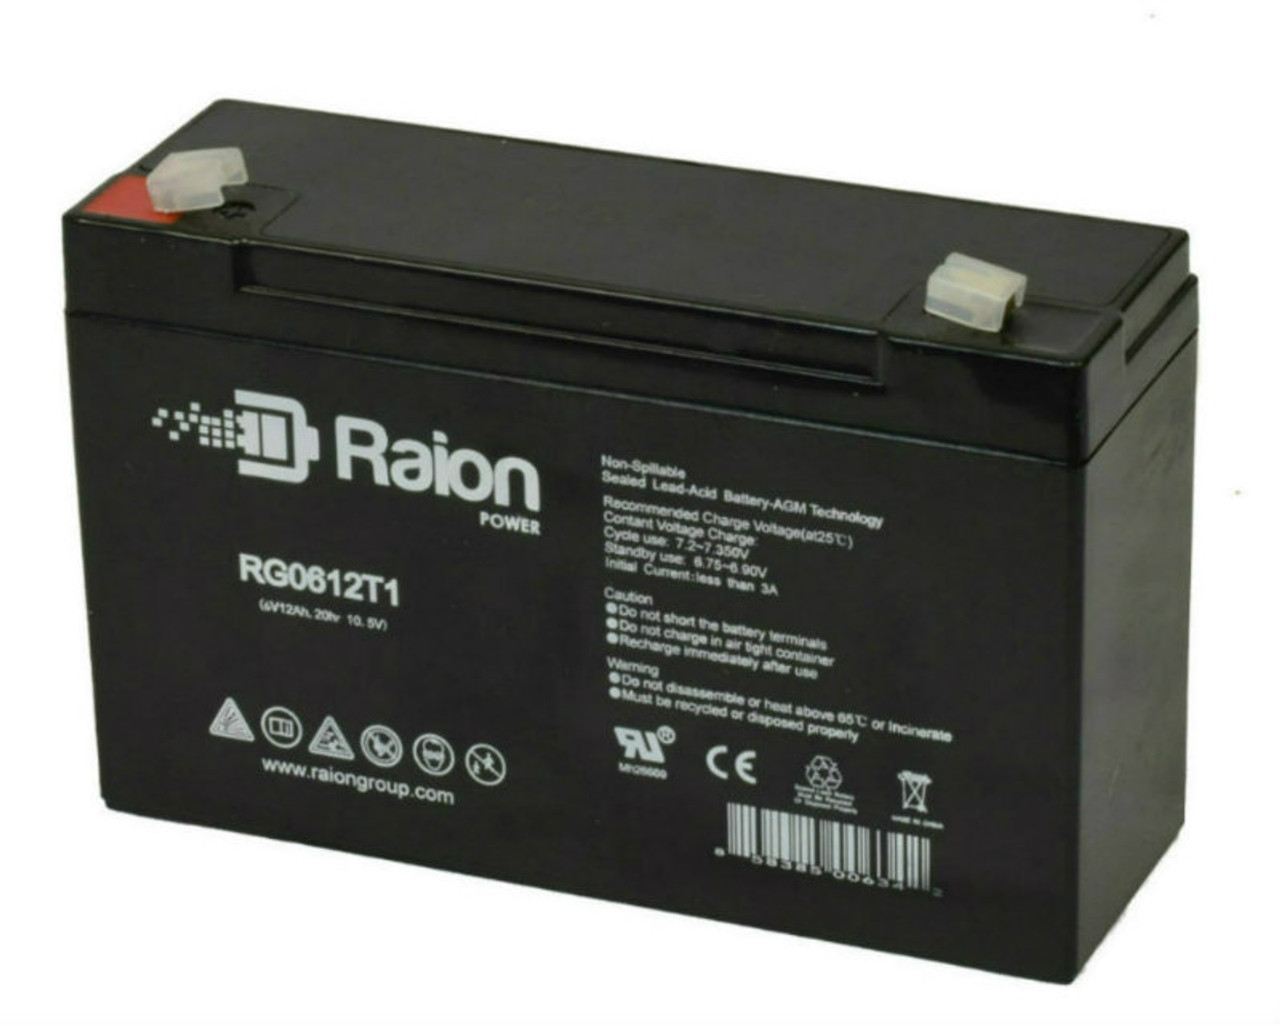 Raion Power RG06120T1 Replacement 6V 12Ah Emergency Light Battery for Light Alarms 860.001